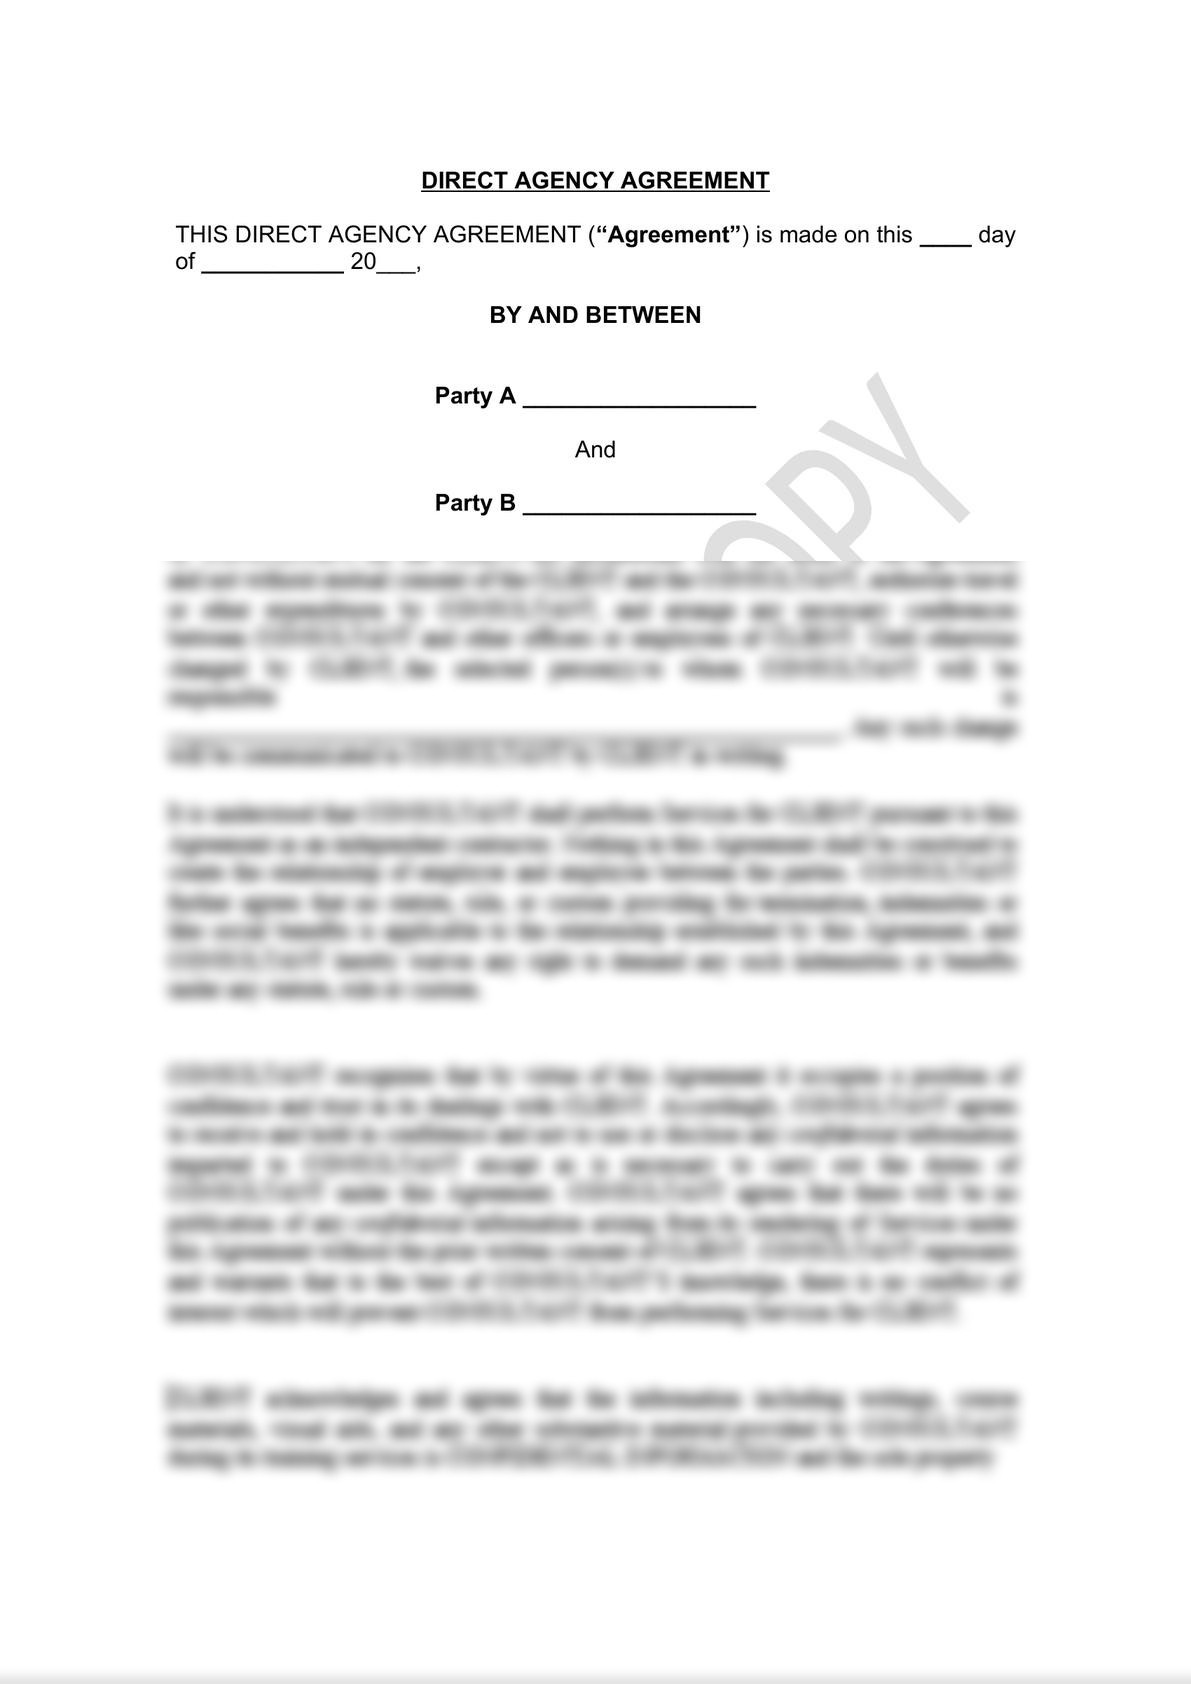 Direct Agency Agreement Draft-0